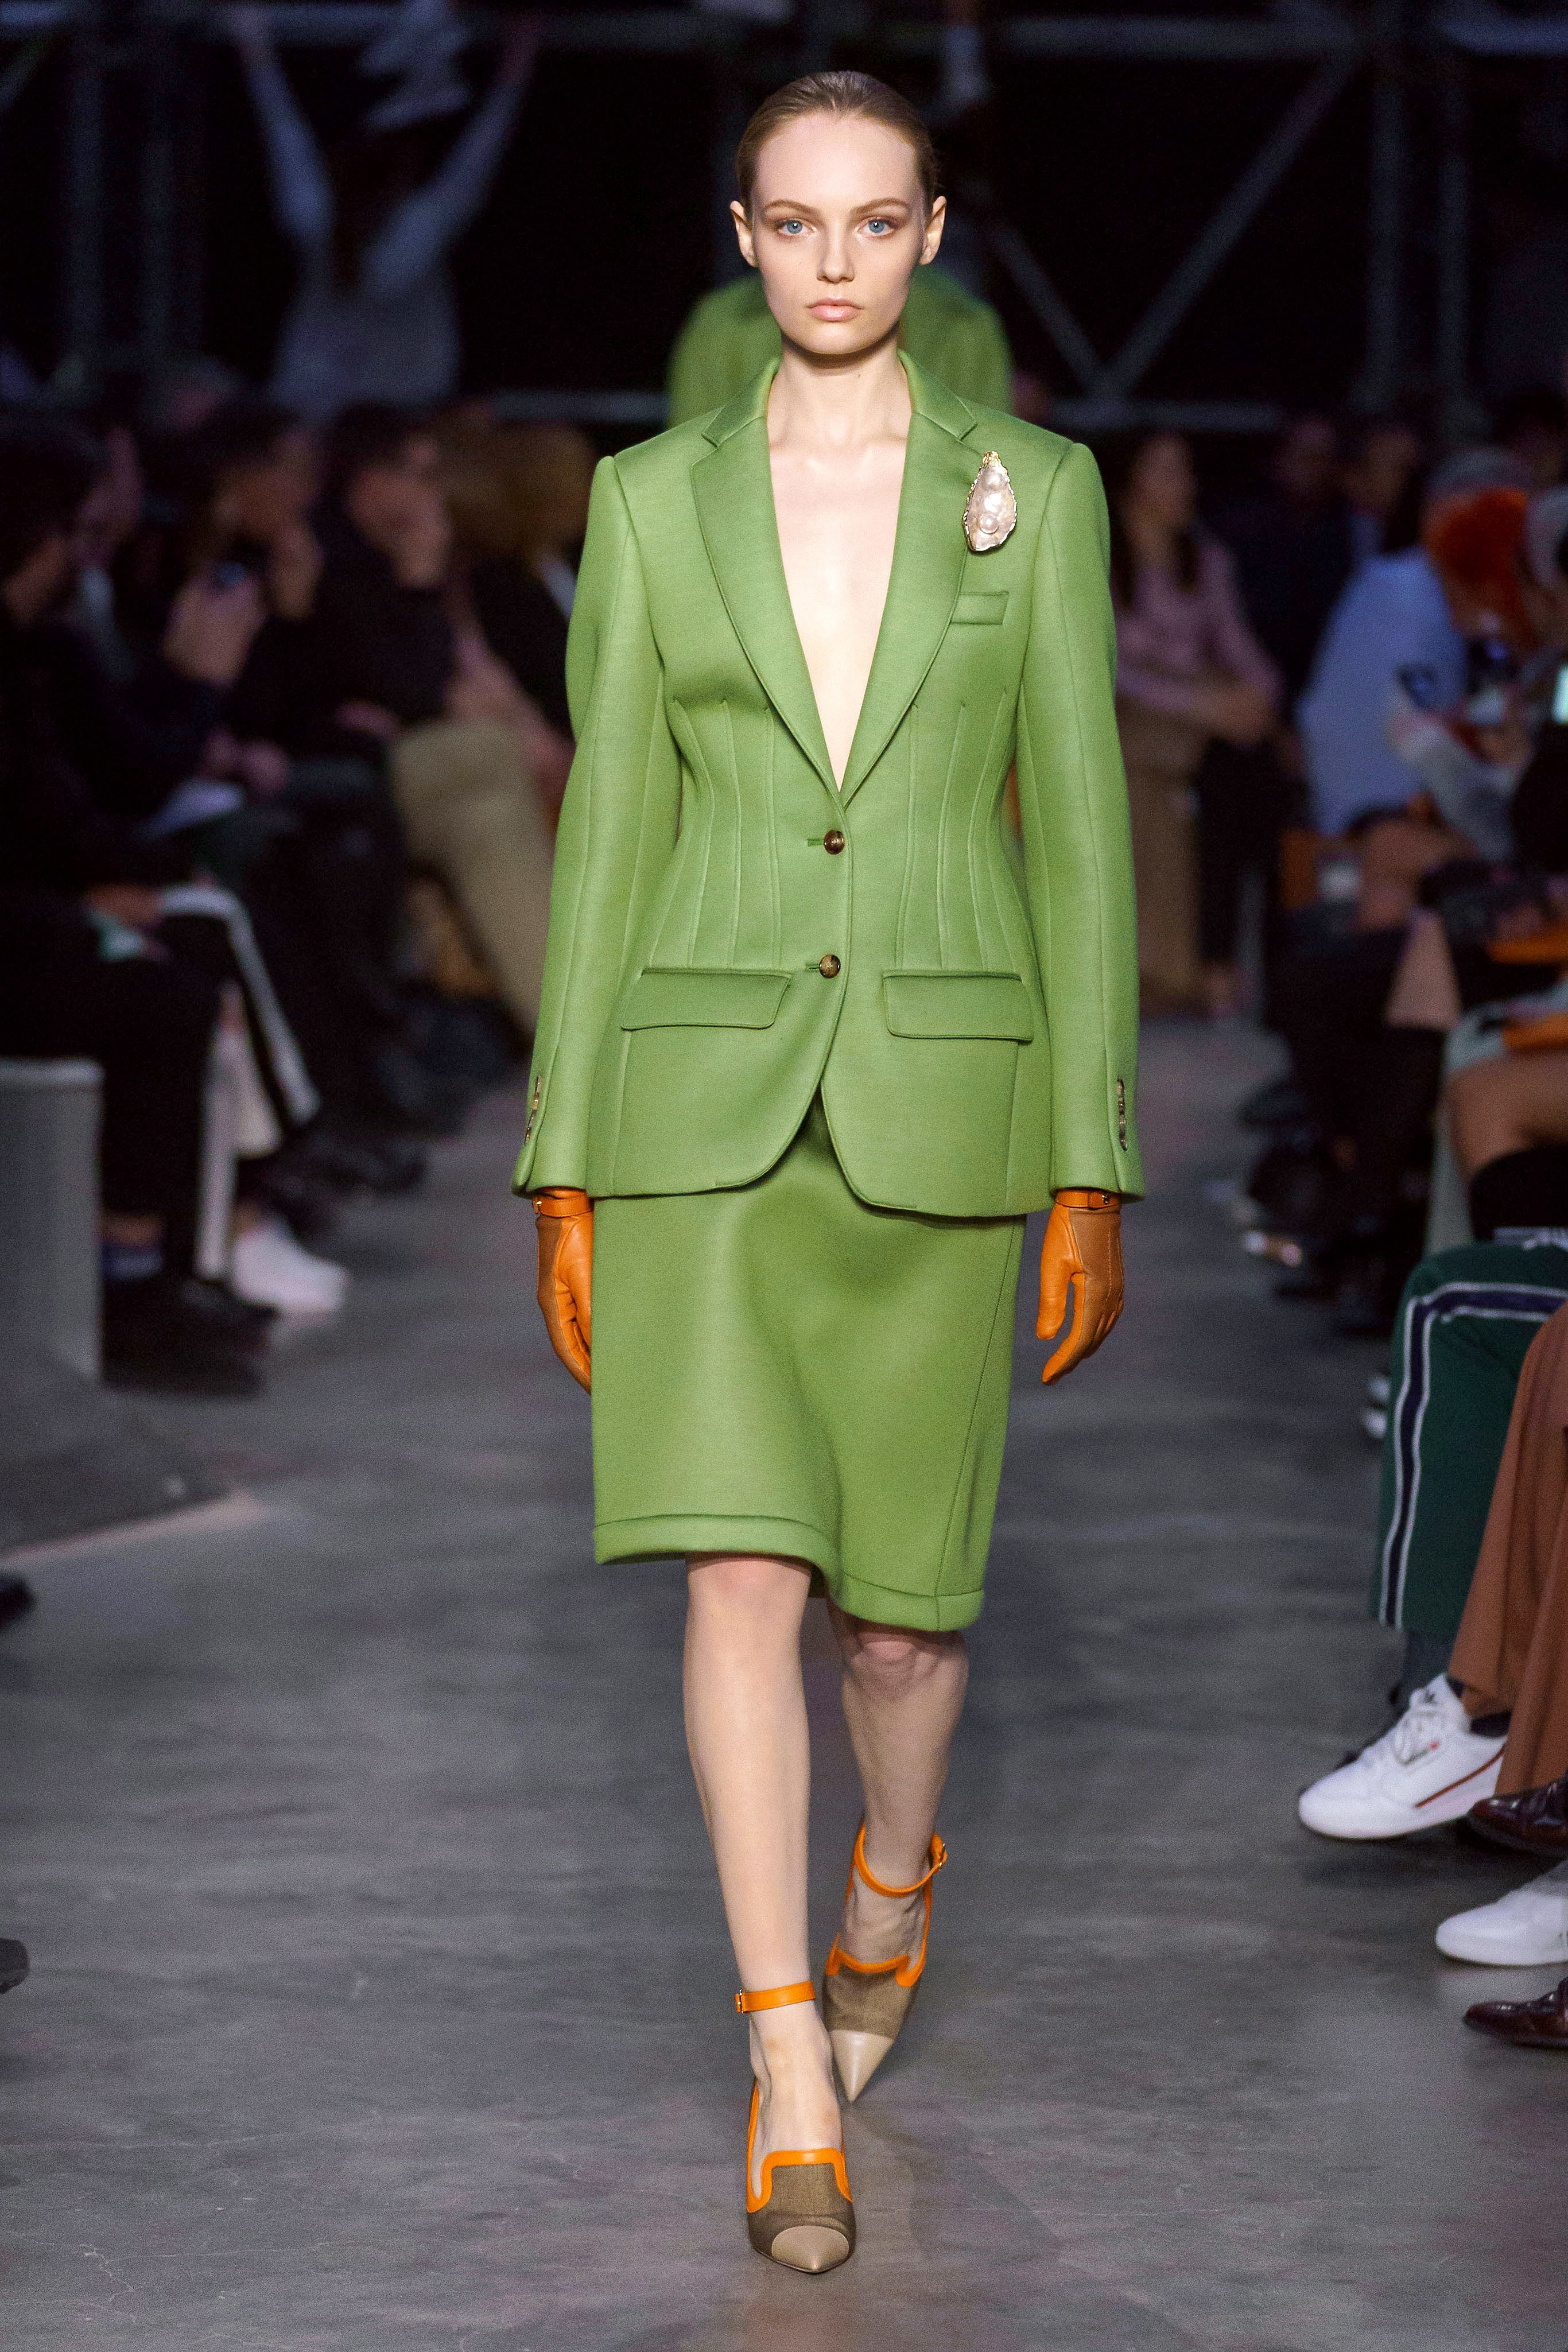 The Best Designs From London Fashion Week Fall 2019